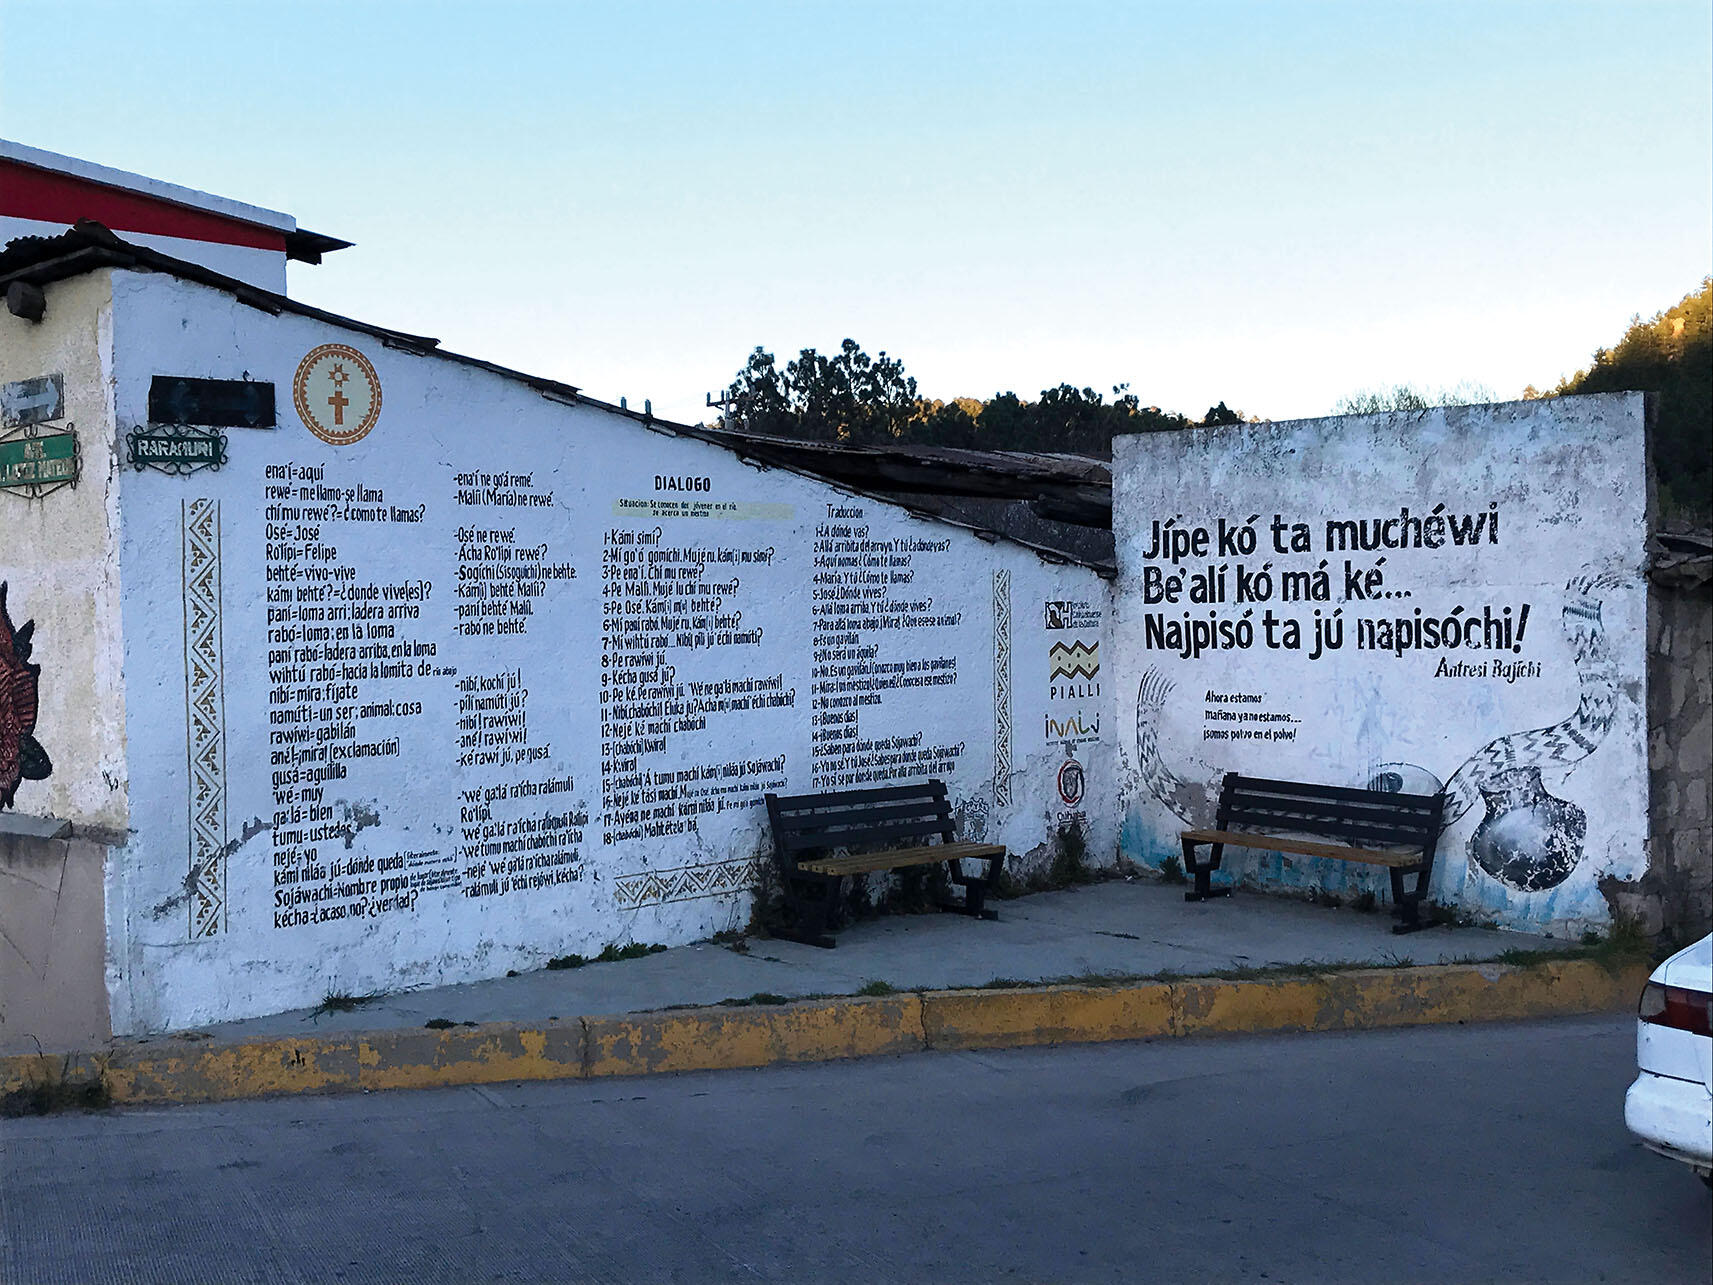 A lexicon of Rarámuri words and their Spanish translation form a mural in Chihuahua, Mexico. (Photo by Malcolm K.)